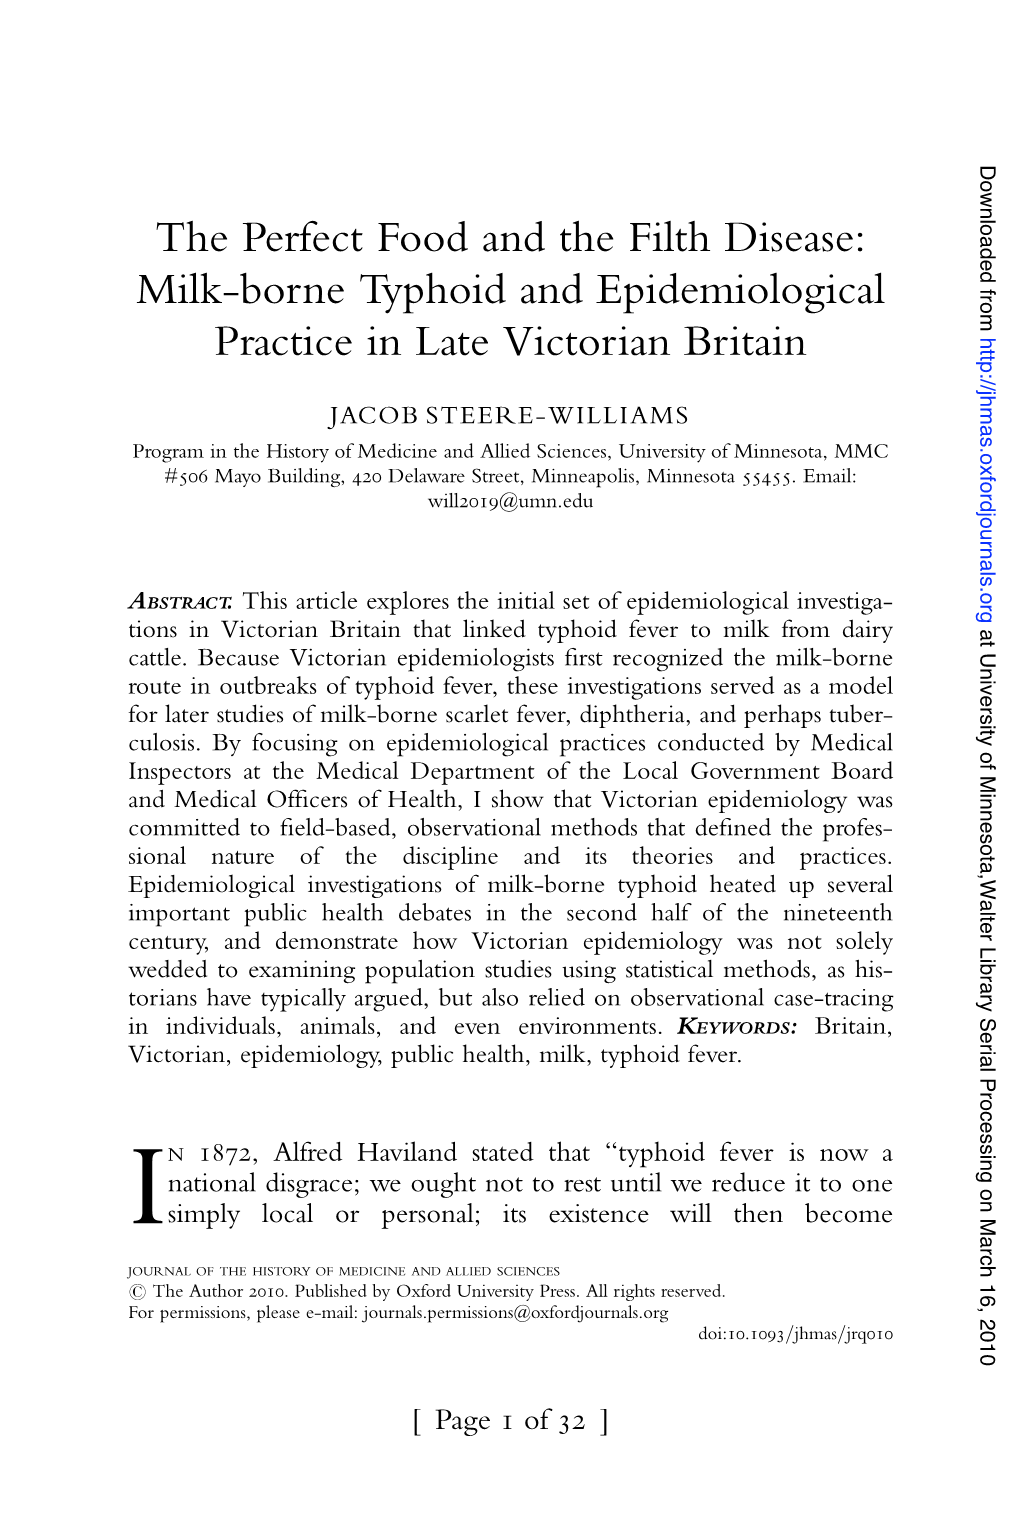 The Perfect Food and the Filth Disease: Milk-Borne Typhoid and Epidemiological Practice in Late Victorian Britain